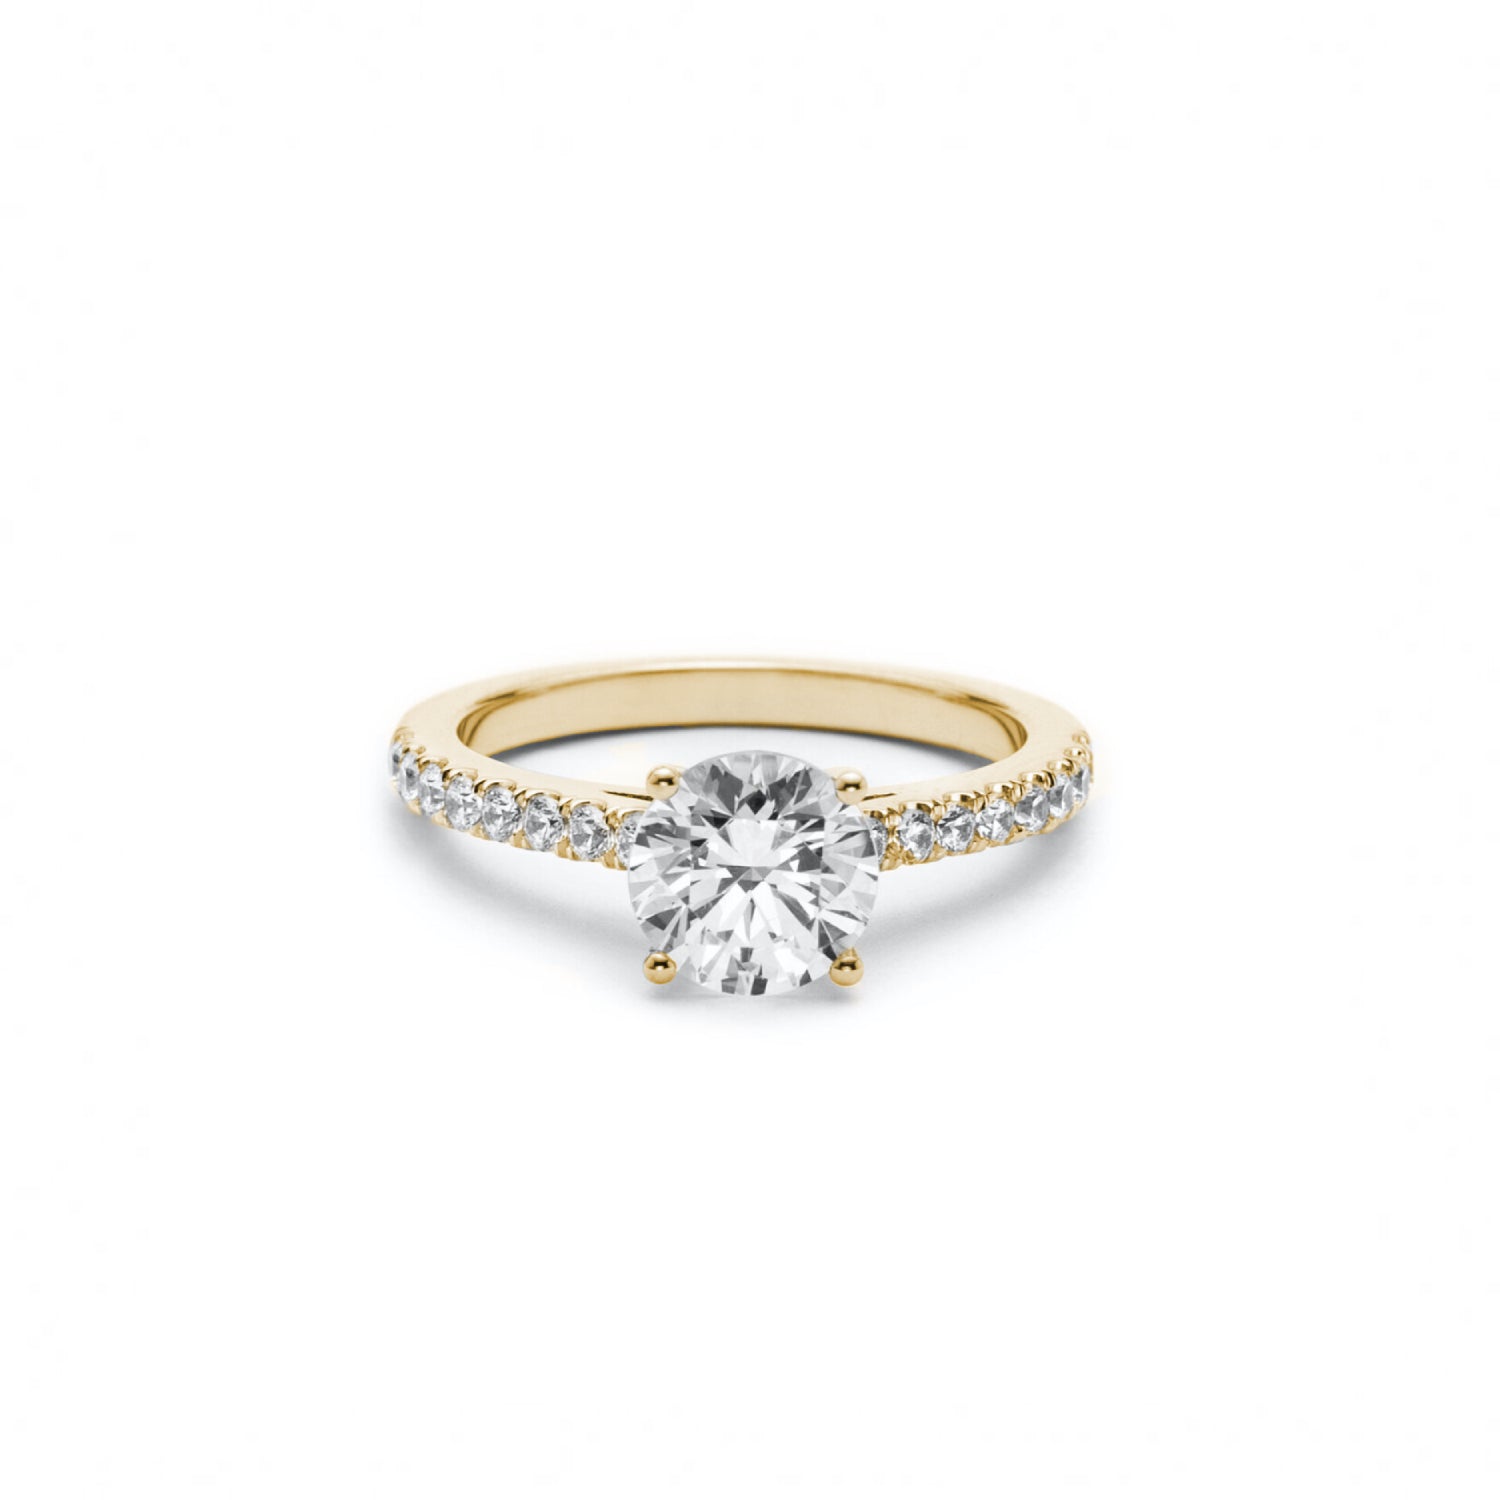 Round Brilliant Cut Diamond Solitaire Engagement Ring in Yellow Gold Front View